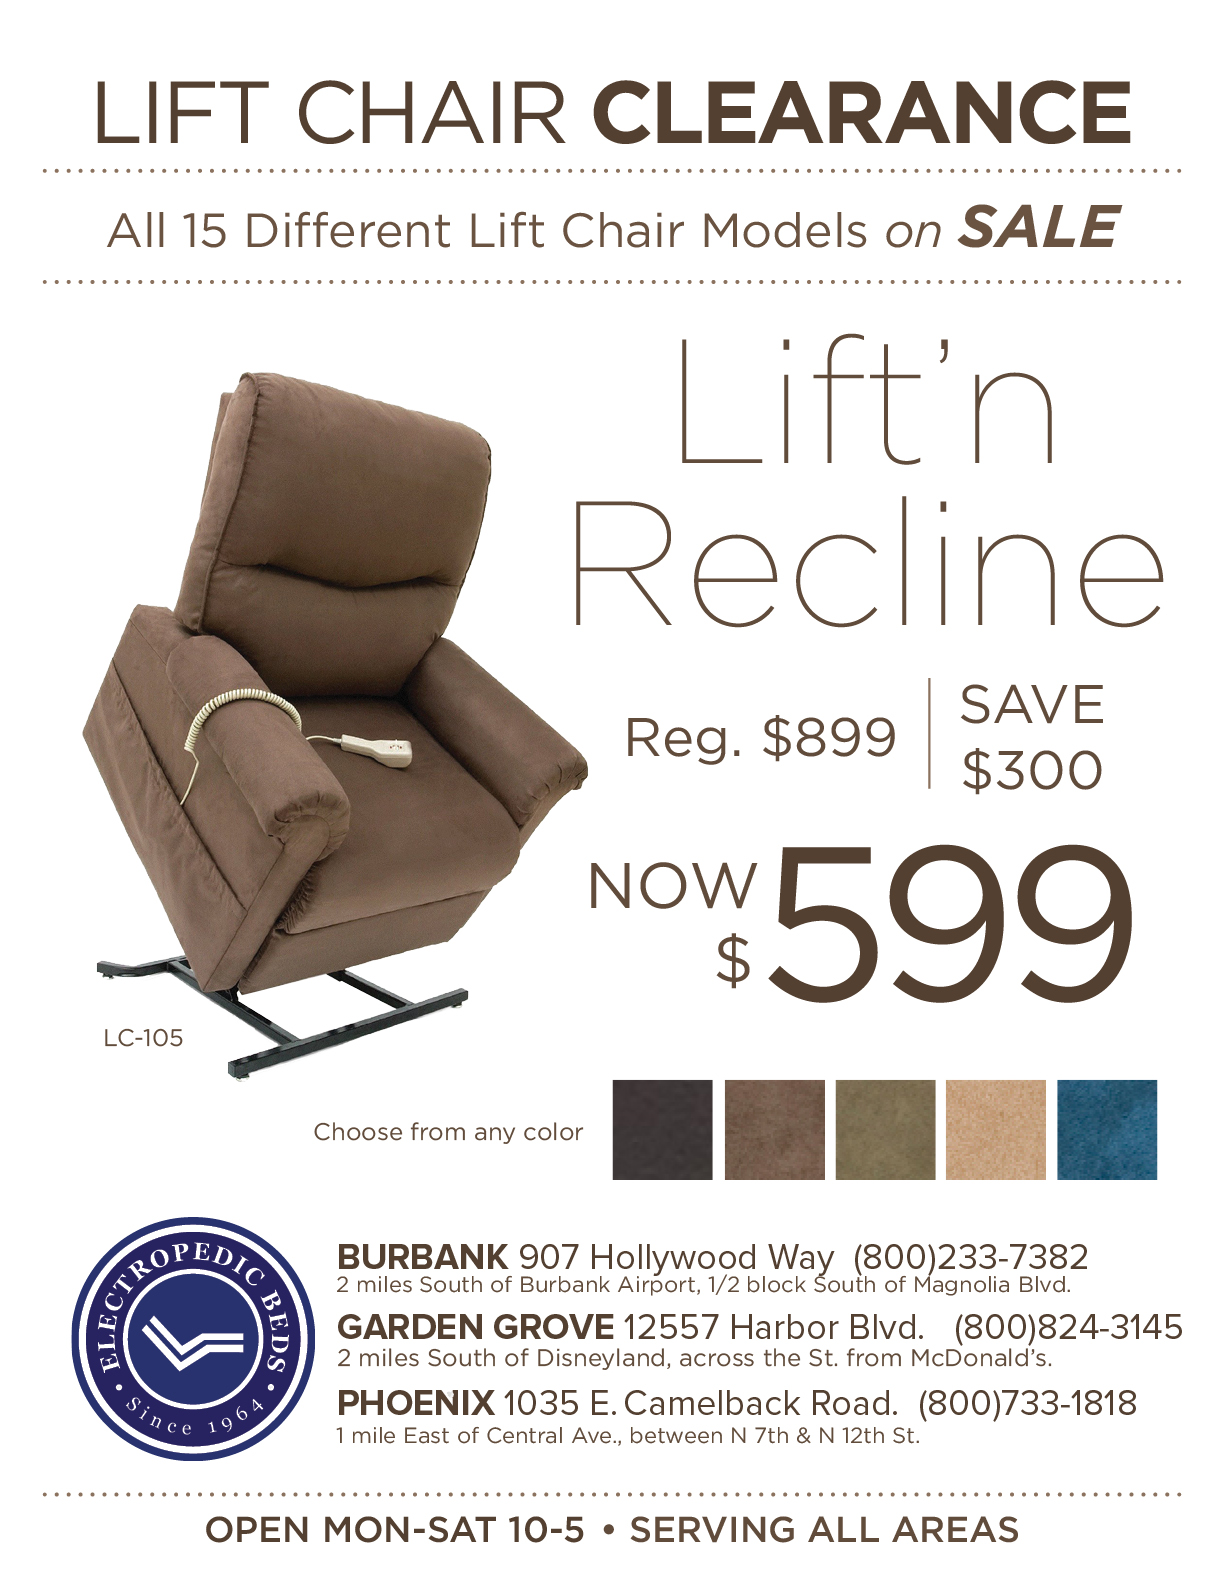 Scottsdale Lift Chairs are made by Pride Reclining Seat Chair Lift and Golden Recliner LiftChairs